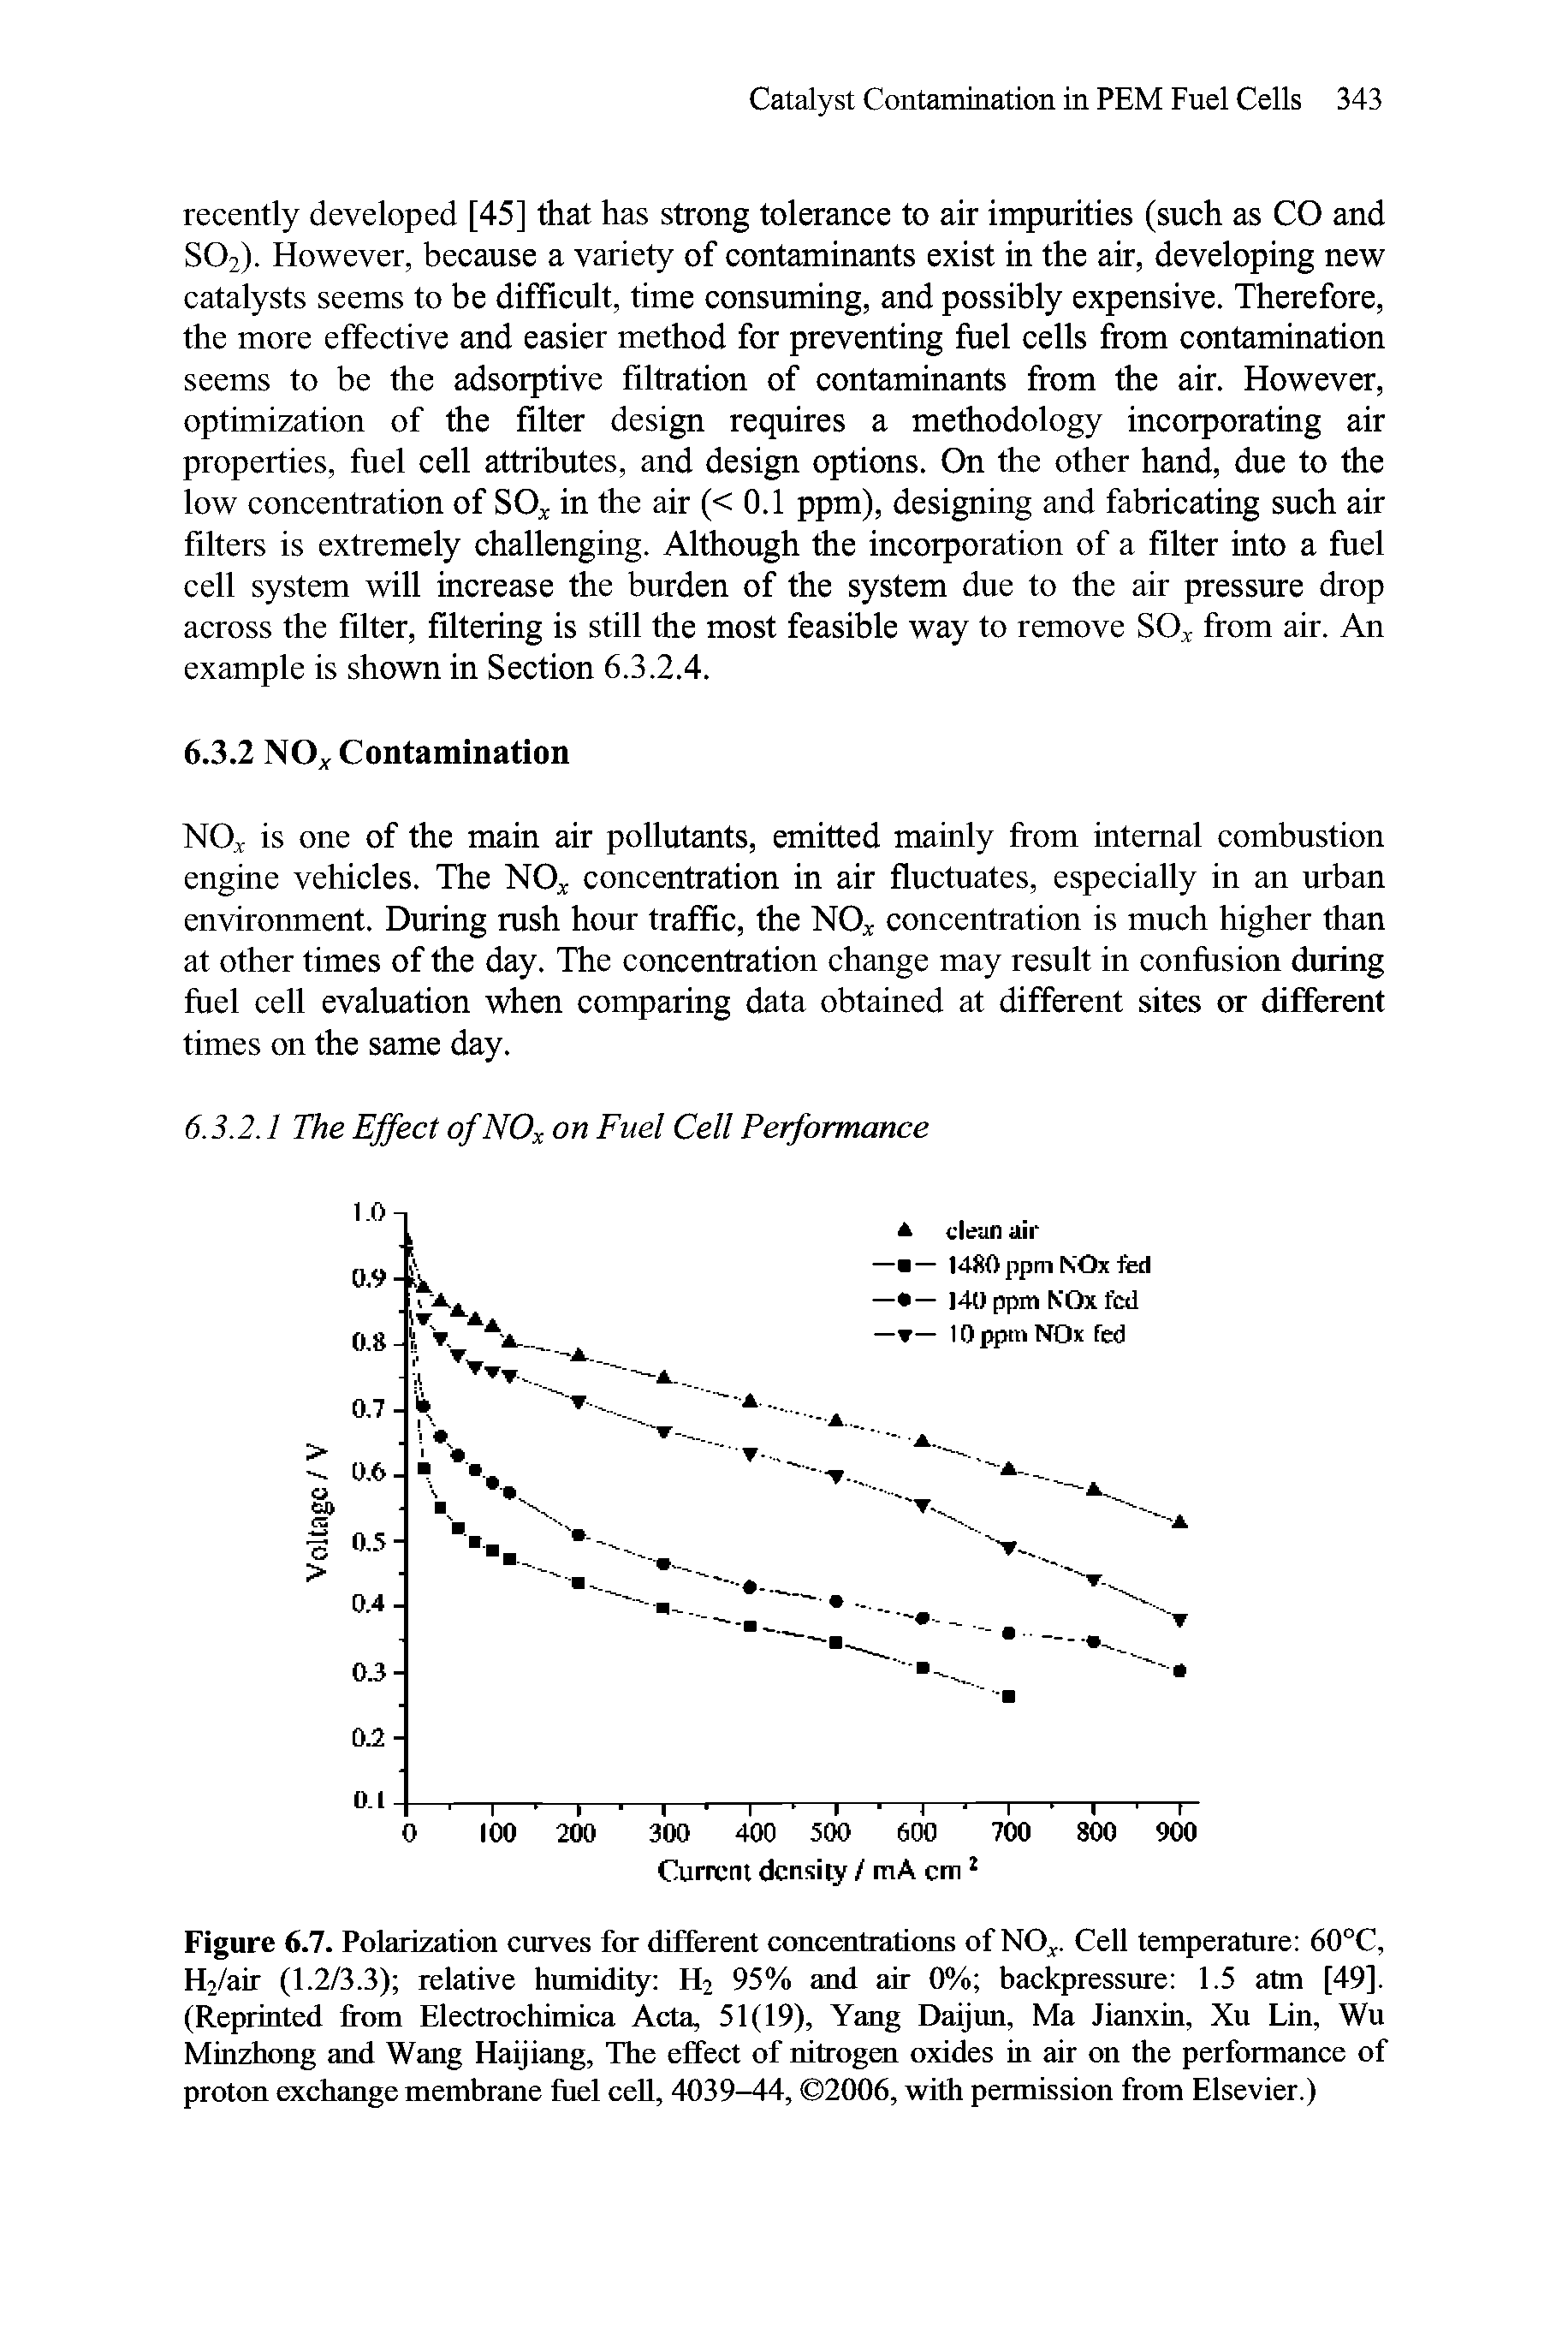 Figure 6.7. Polarization curves for different concentrations of NO . Cell temperature 60°C, H2/air (1.2/3.3) relative humidity H2 95% and air 0% backpressure 1.5 atm [49], (Reprinted from Electrochimica Acta, 51(19), Yang Daijun, Ma Jianxin, Xu Lin, Wu Minzhong and Wang Haijiang, The effect of nitrogen oxides in air on the performance of proton exchange membrane fuel cell, 4039-44, 2006, with permission from Elsevier.)...